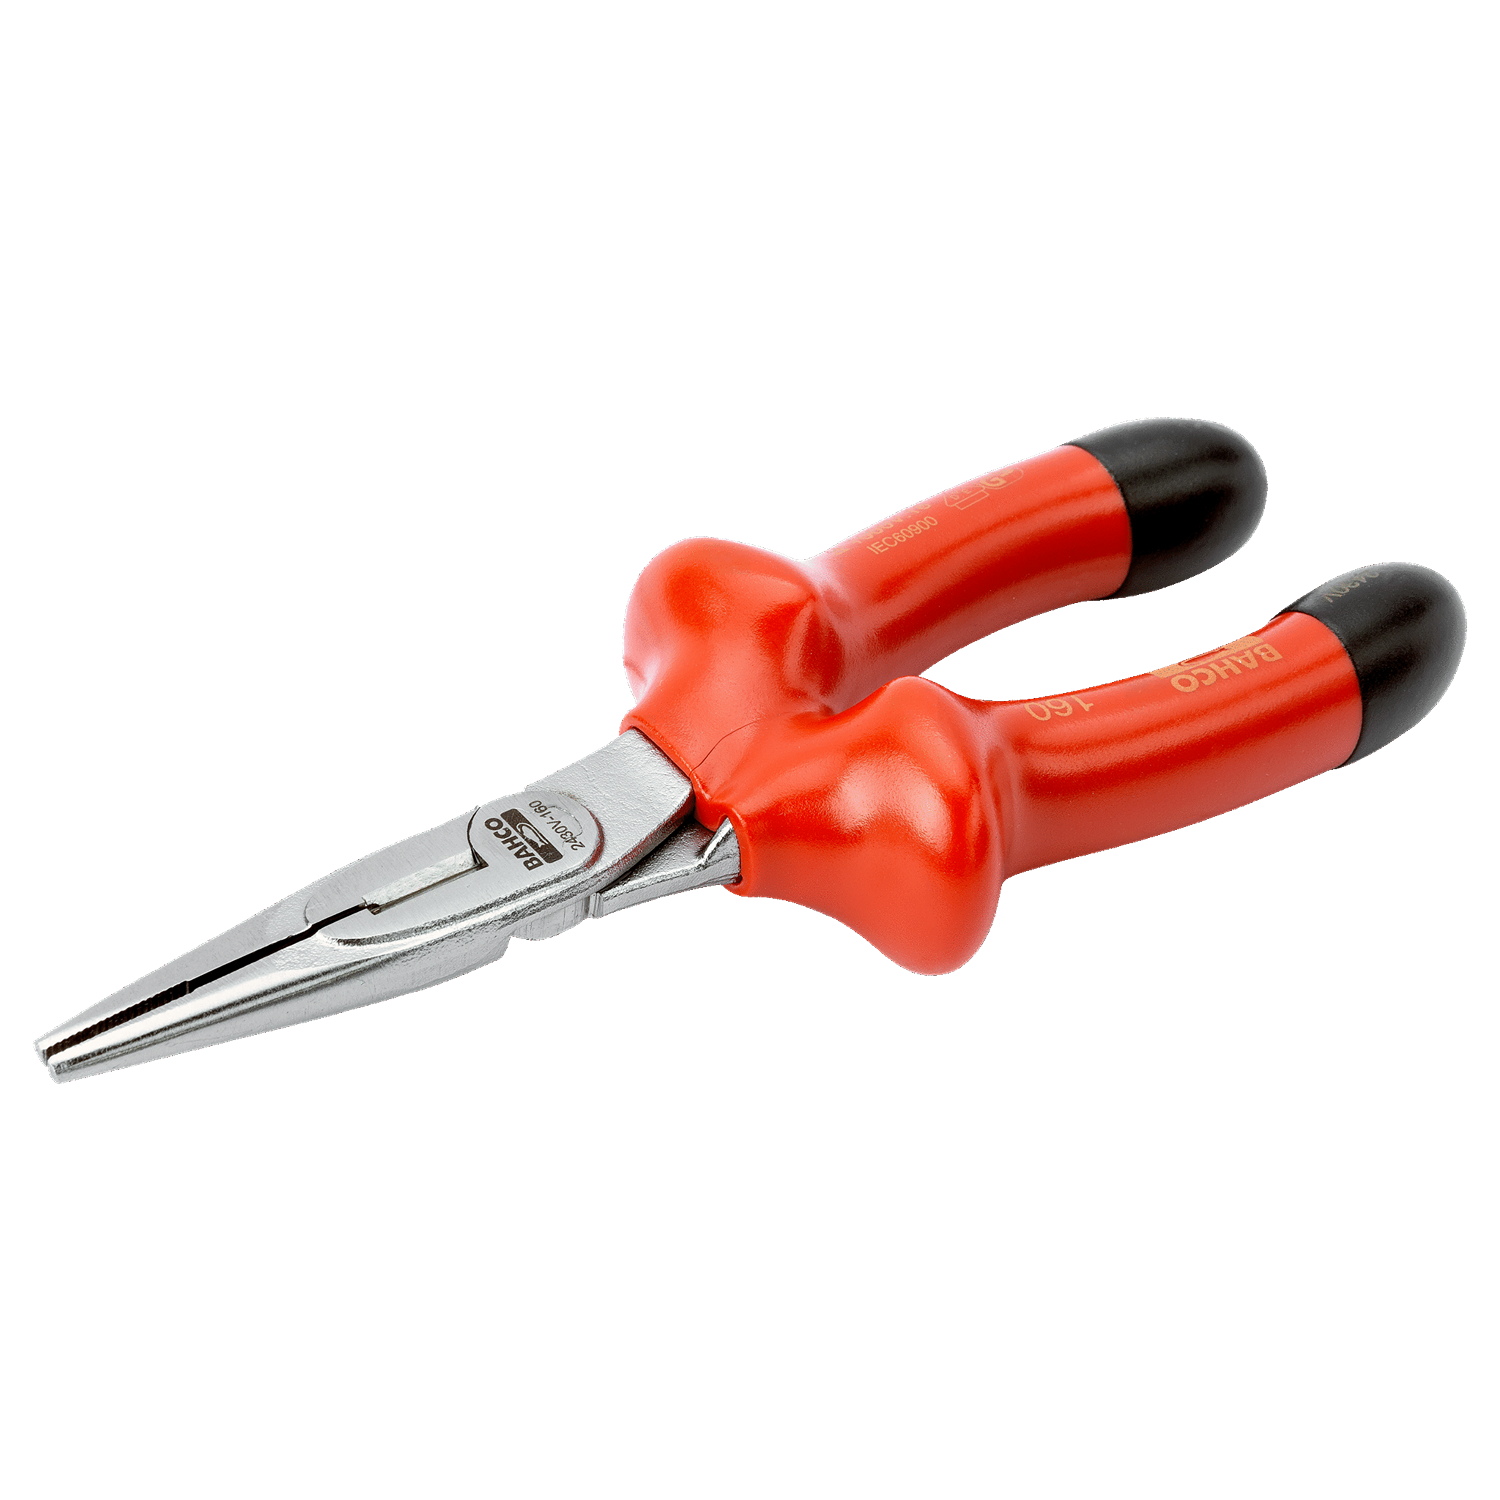 BAHCO 2430V VDE Insulated Snipe Nose Plier (BAHCO Tools) - Premium Snipe Nose Plier from BAHCO - Shop now at Yew Aik.